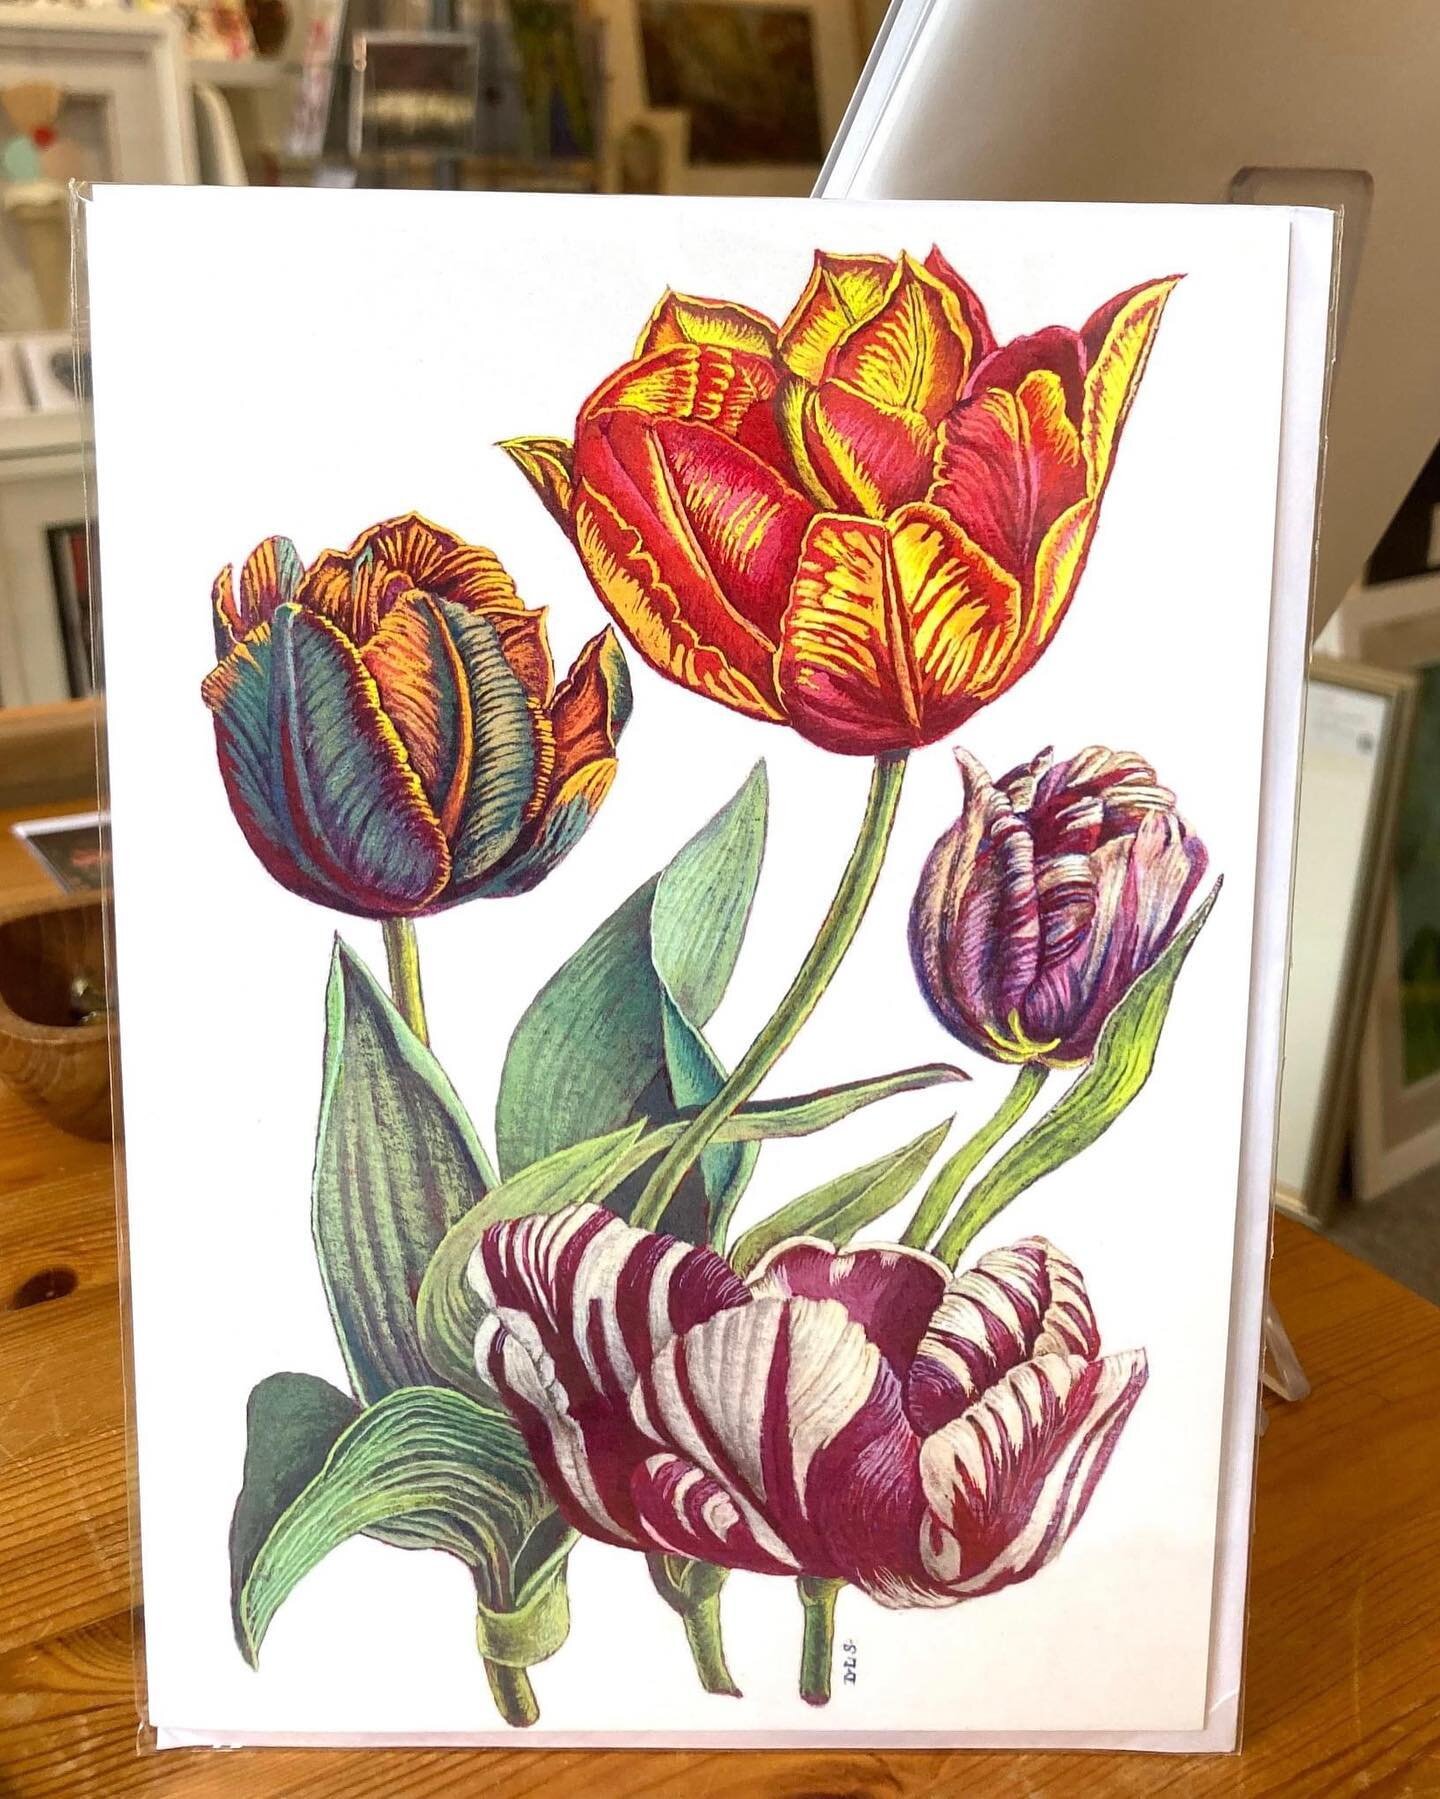 A wonderful card from 87 year old artist Derek Selford. He has clearly passed on his fabulous talent as his daughter is @rachelsetford one of our all time favourite creatives here at The Good Earth Gallery #artyfamily #creativelife #botanicalart #flo